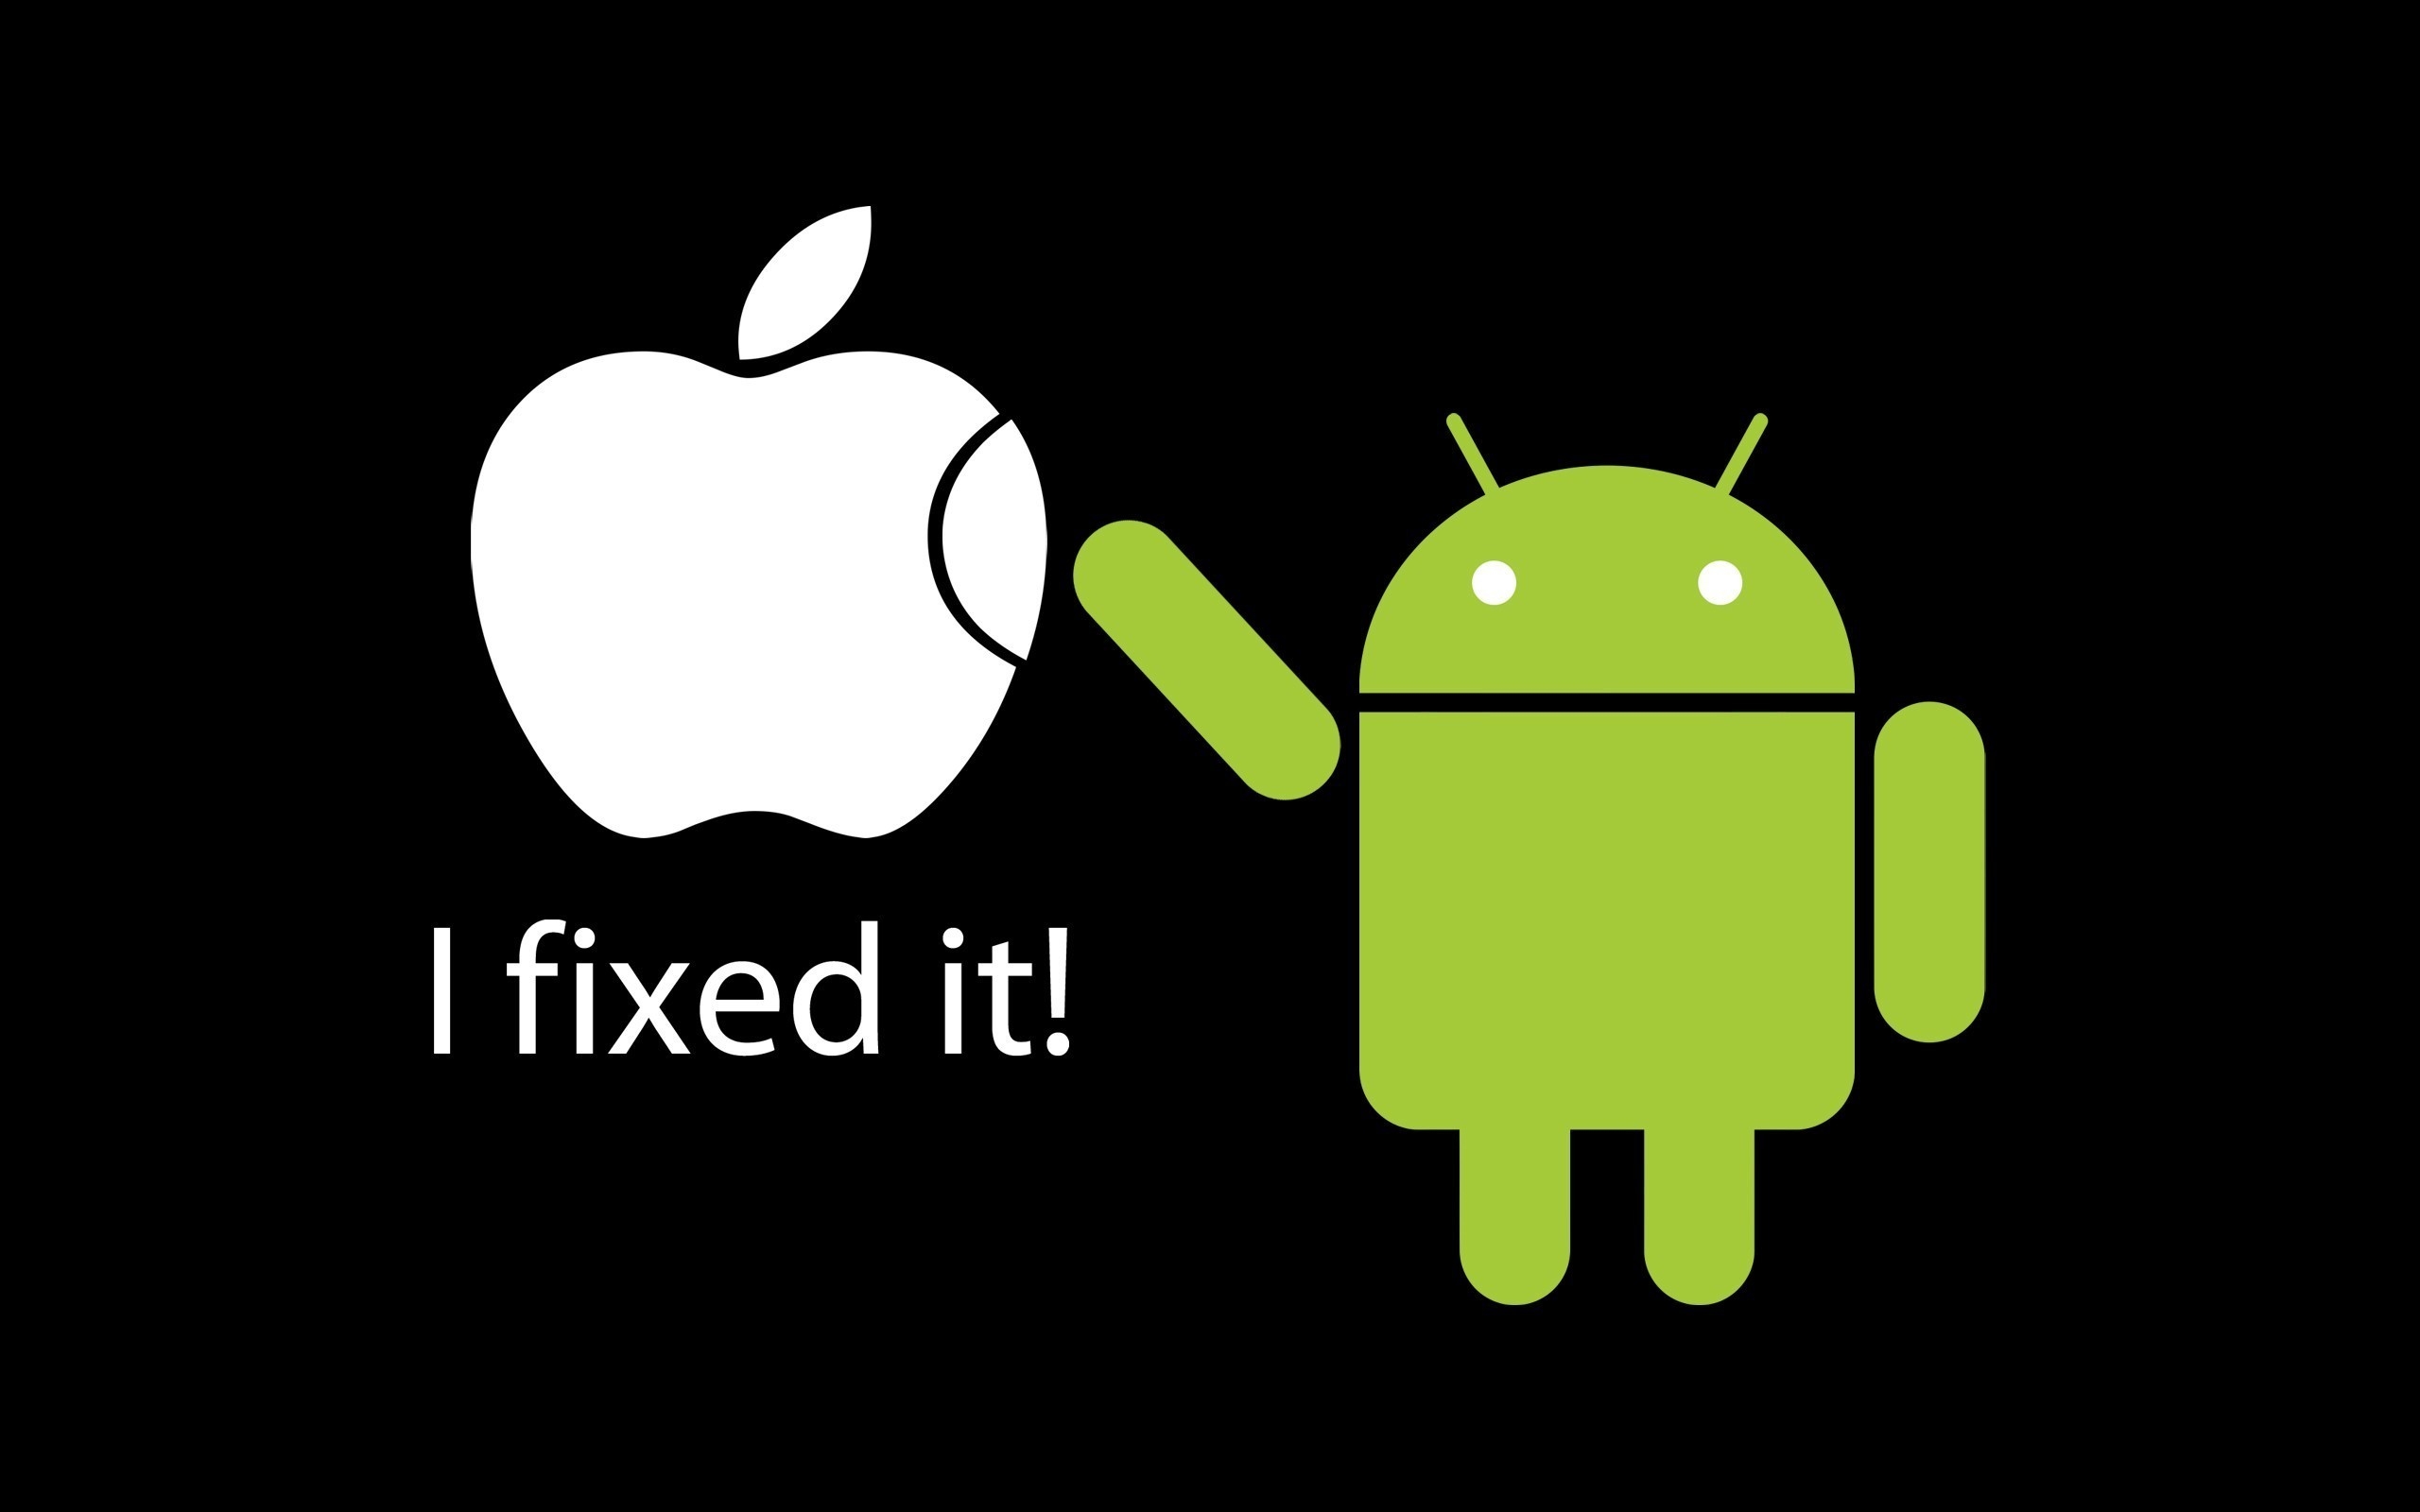 Fixed Apple by Android for 2560 x 1600 widescreen resolution